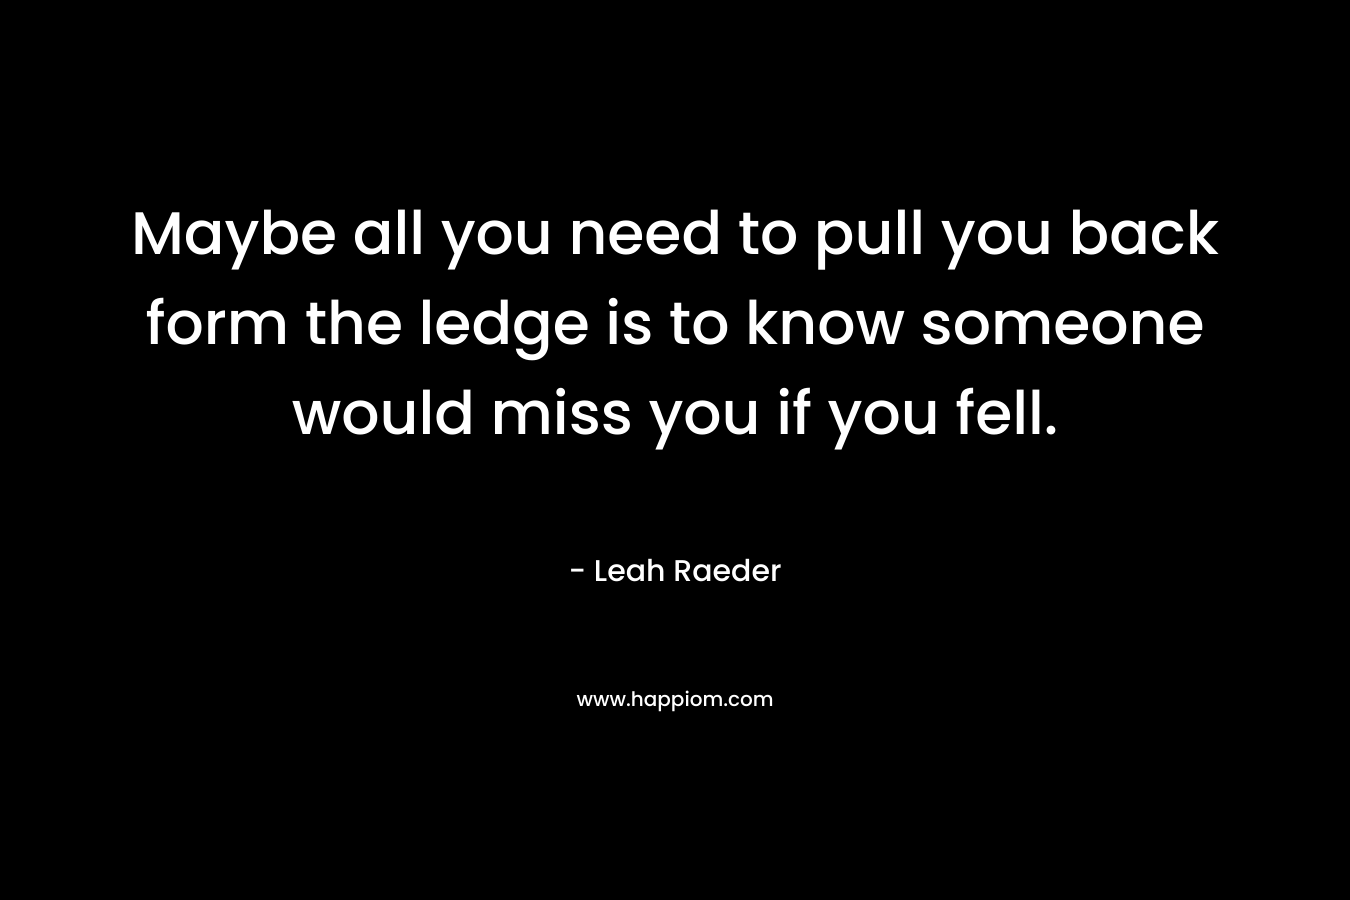 Maybe all you need to pull you back form the ledge is to know someone would miss you if you fell. – Leah Raeder